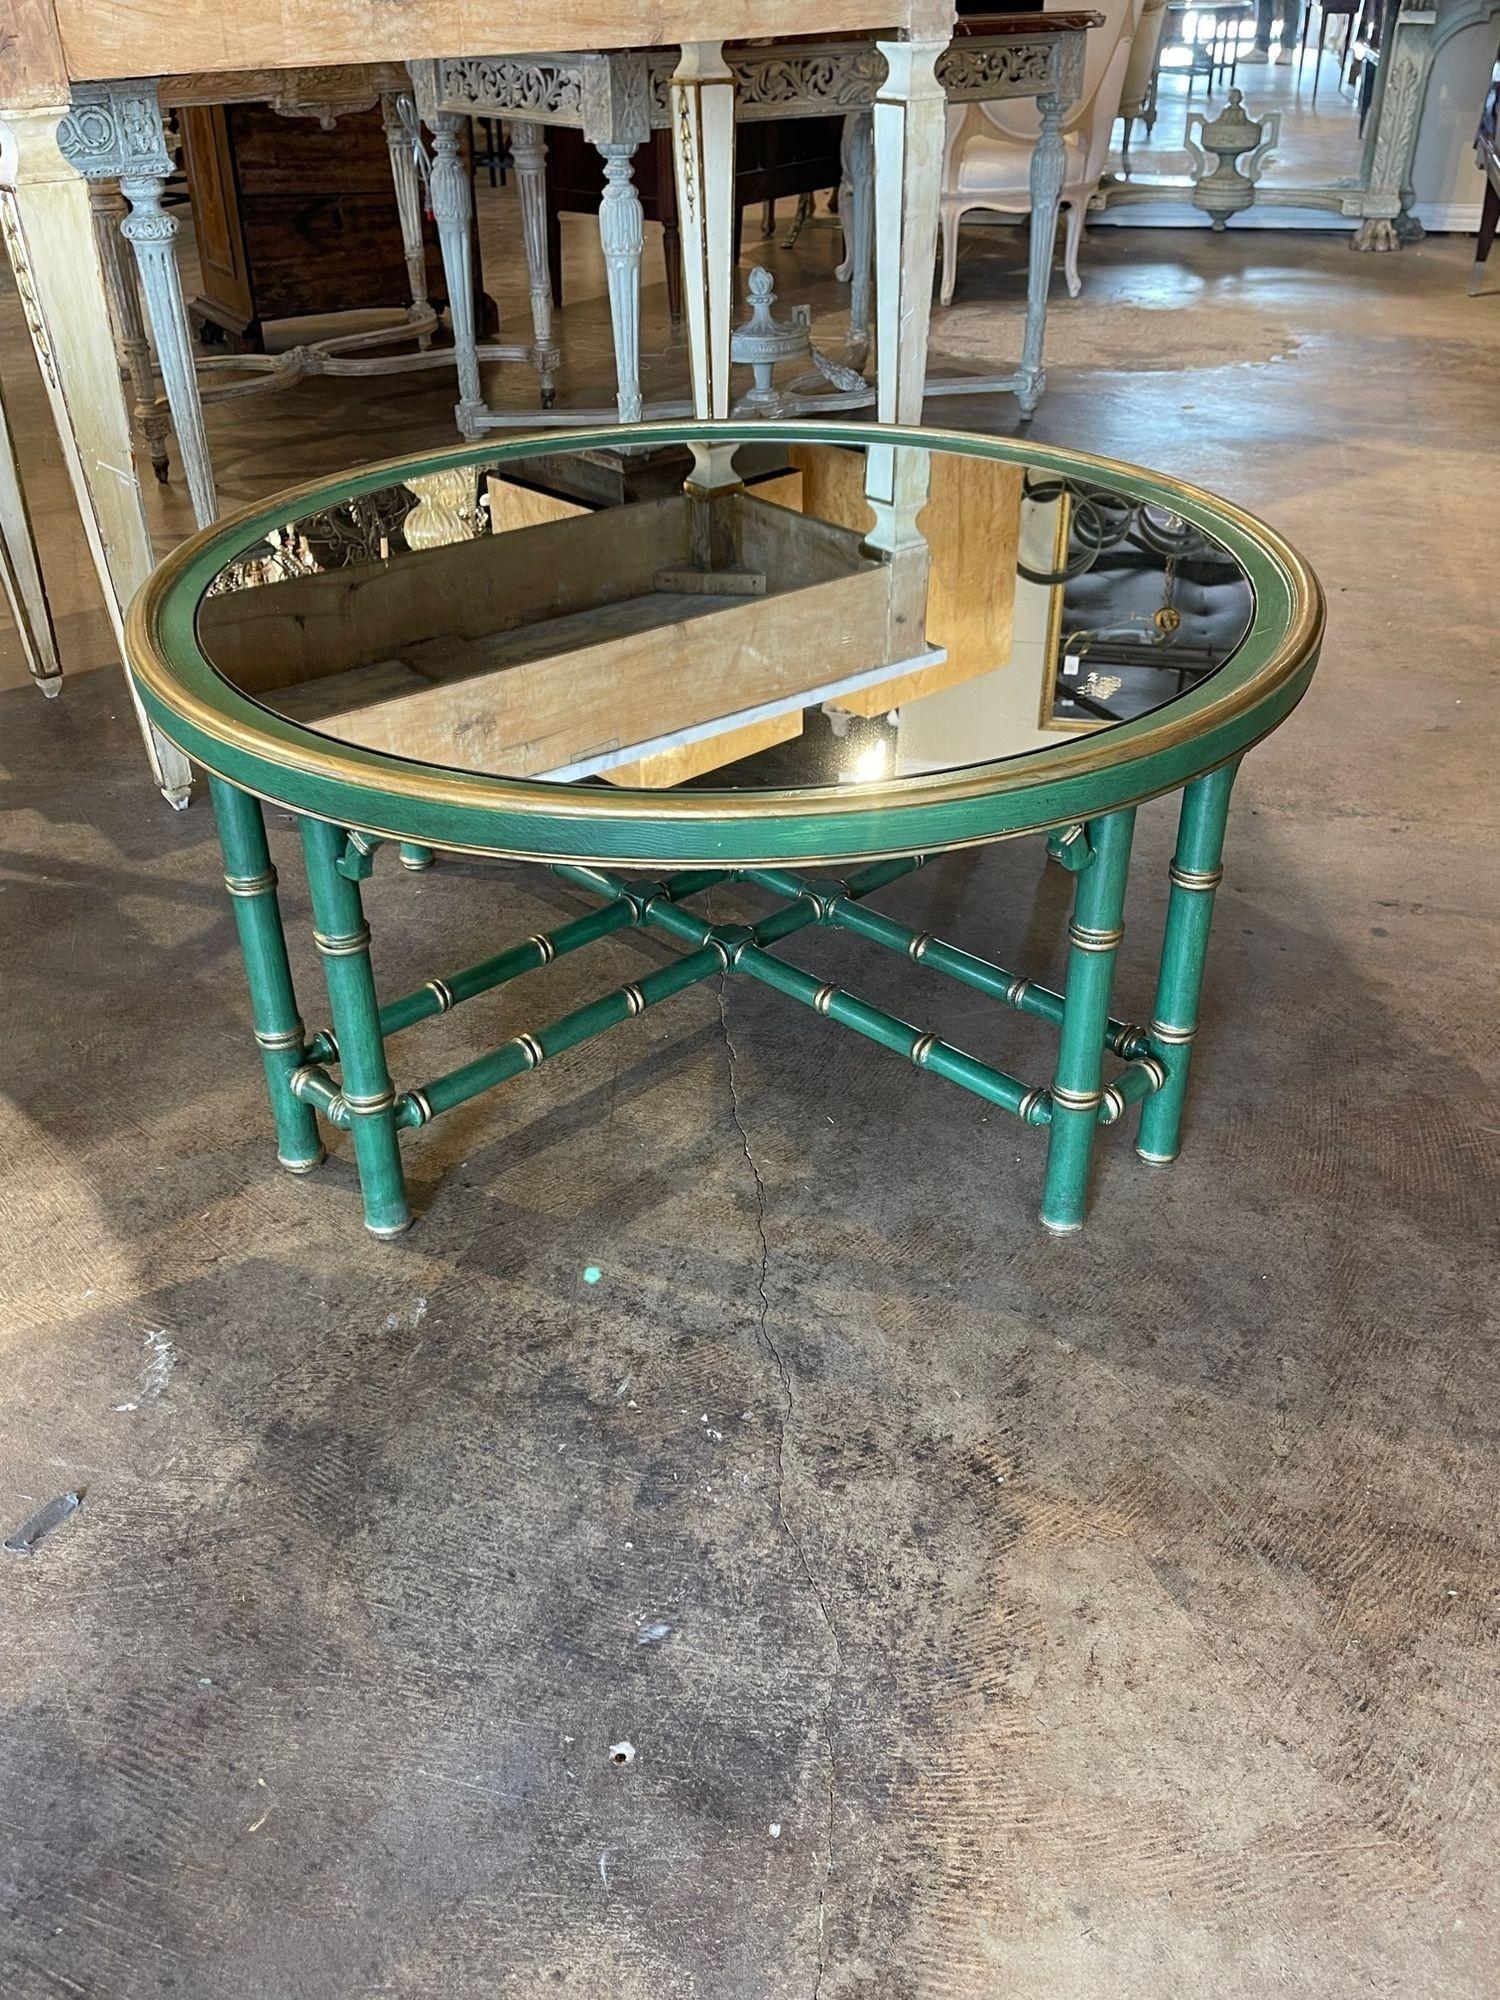 Very nice vintage Italian painted bamboo form coffee table with mirrored top. Lovely green patina with gold highlights. Creates an interesting focal point in a lovely room.